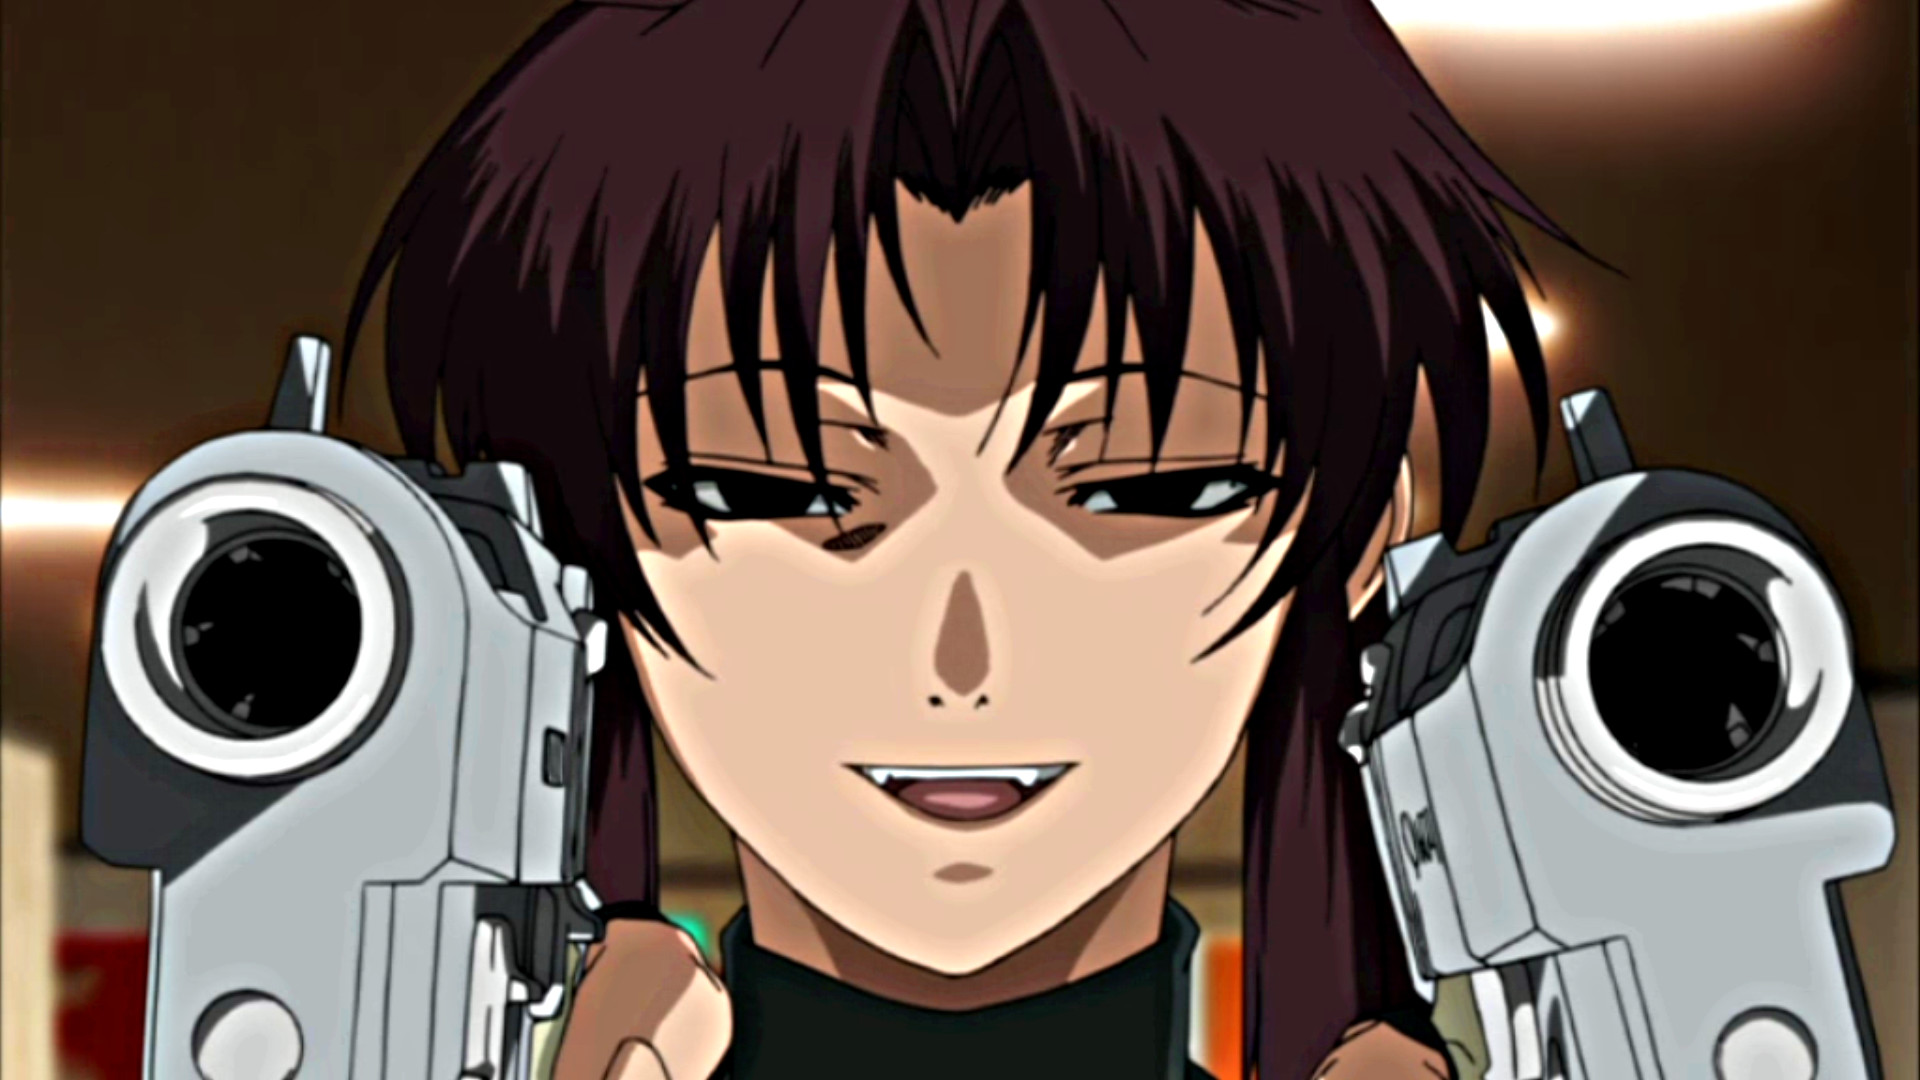 1920x1080 Badass Anime Characters would not be complete without Revy from Black  Lagoon. She loves her